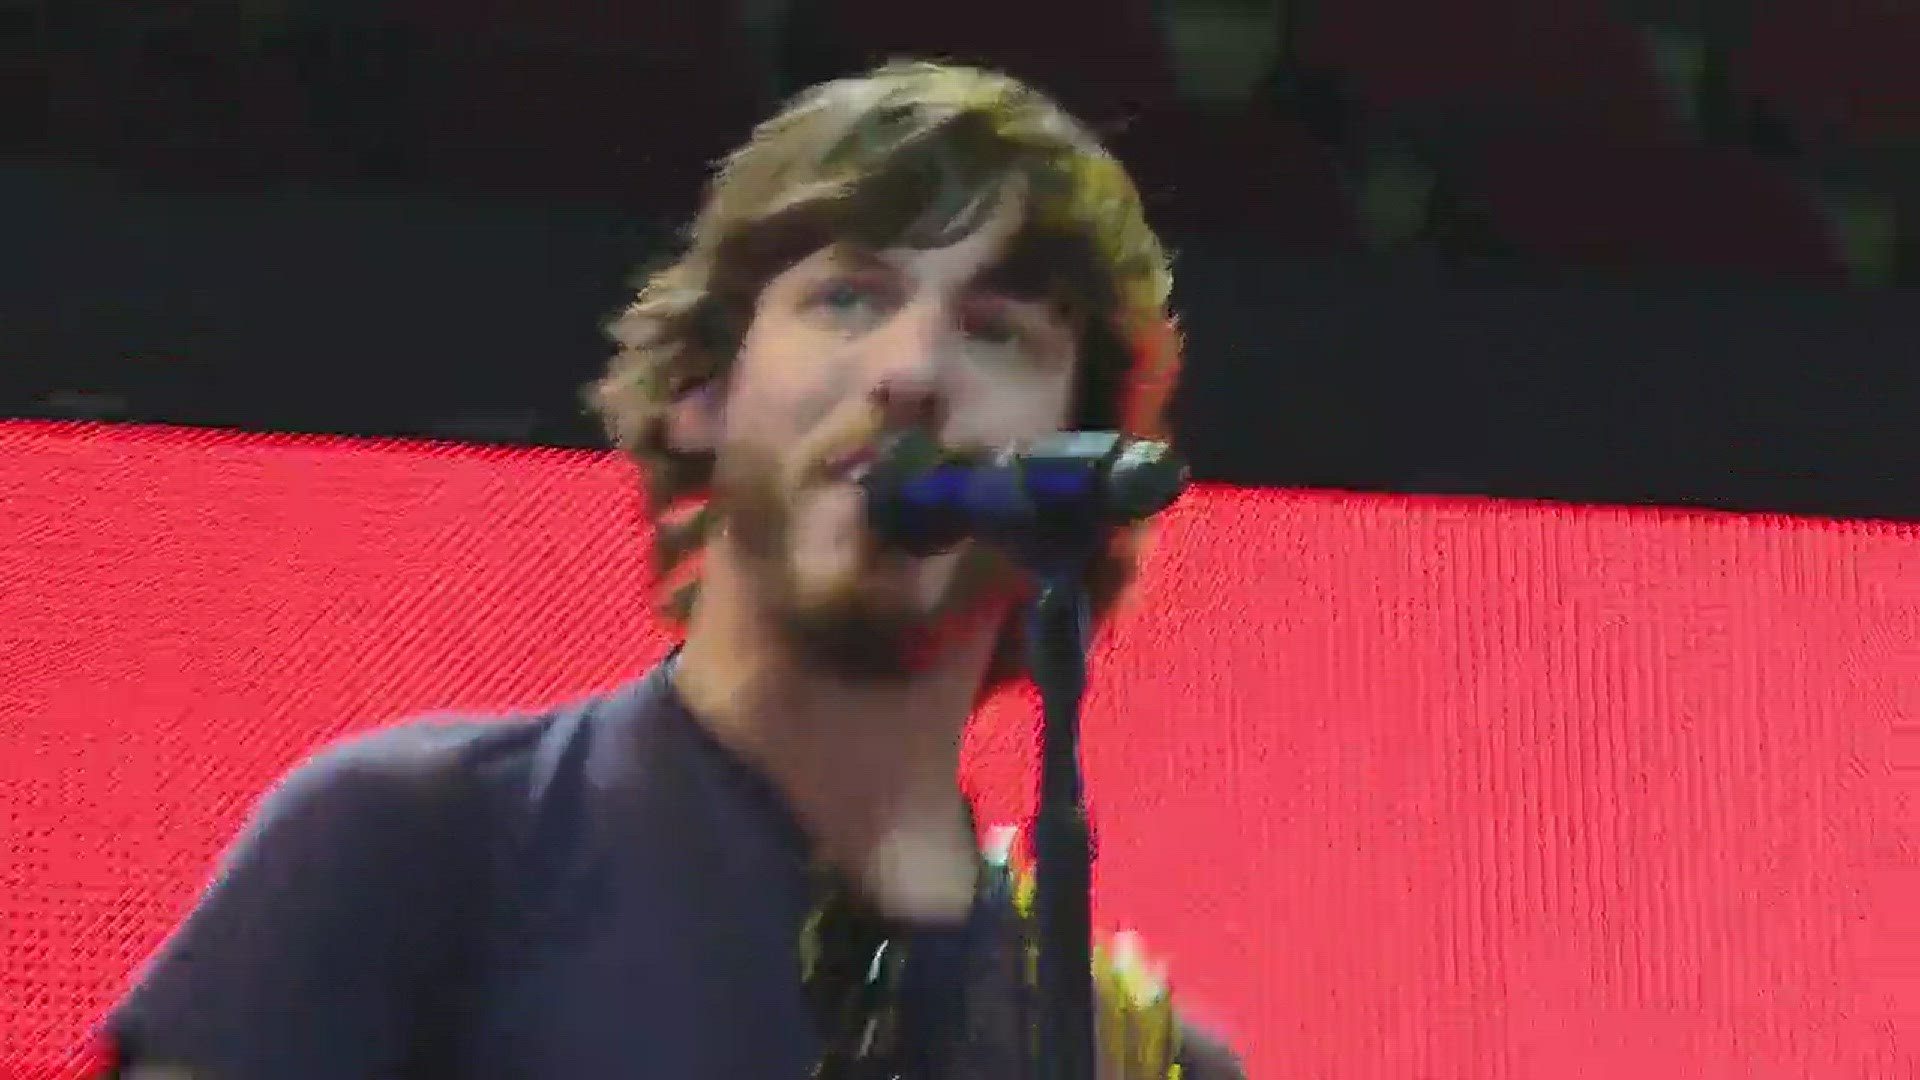 Country singer Chris Janson performed at Quicken Loans Arena on Wednesday afternoon